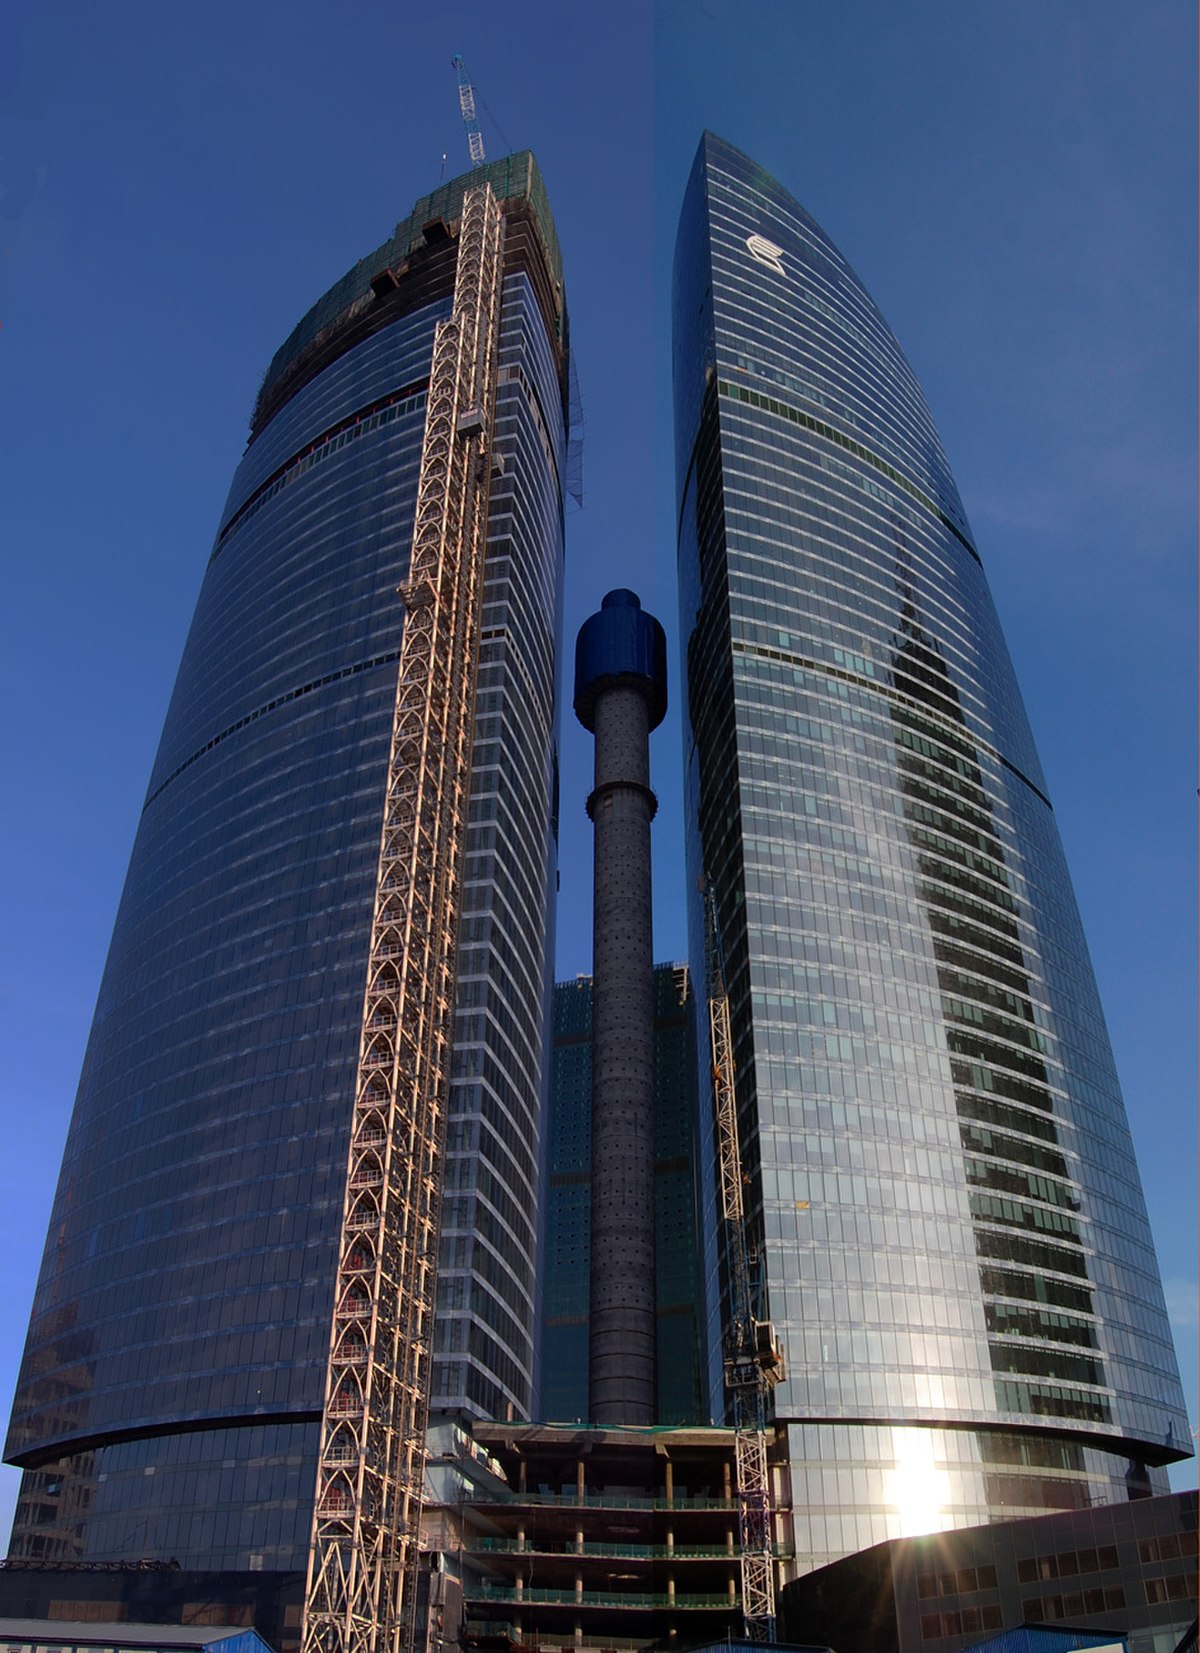 Federaion Tower in Moscow-City 28-03-2010.jpg